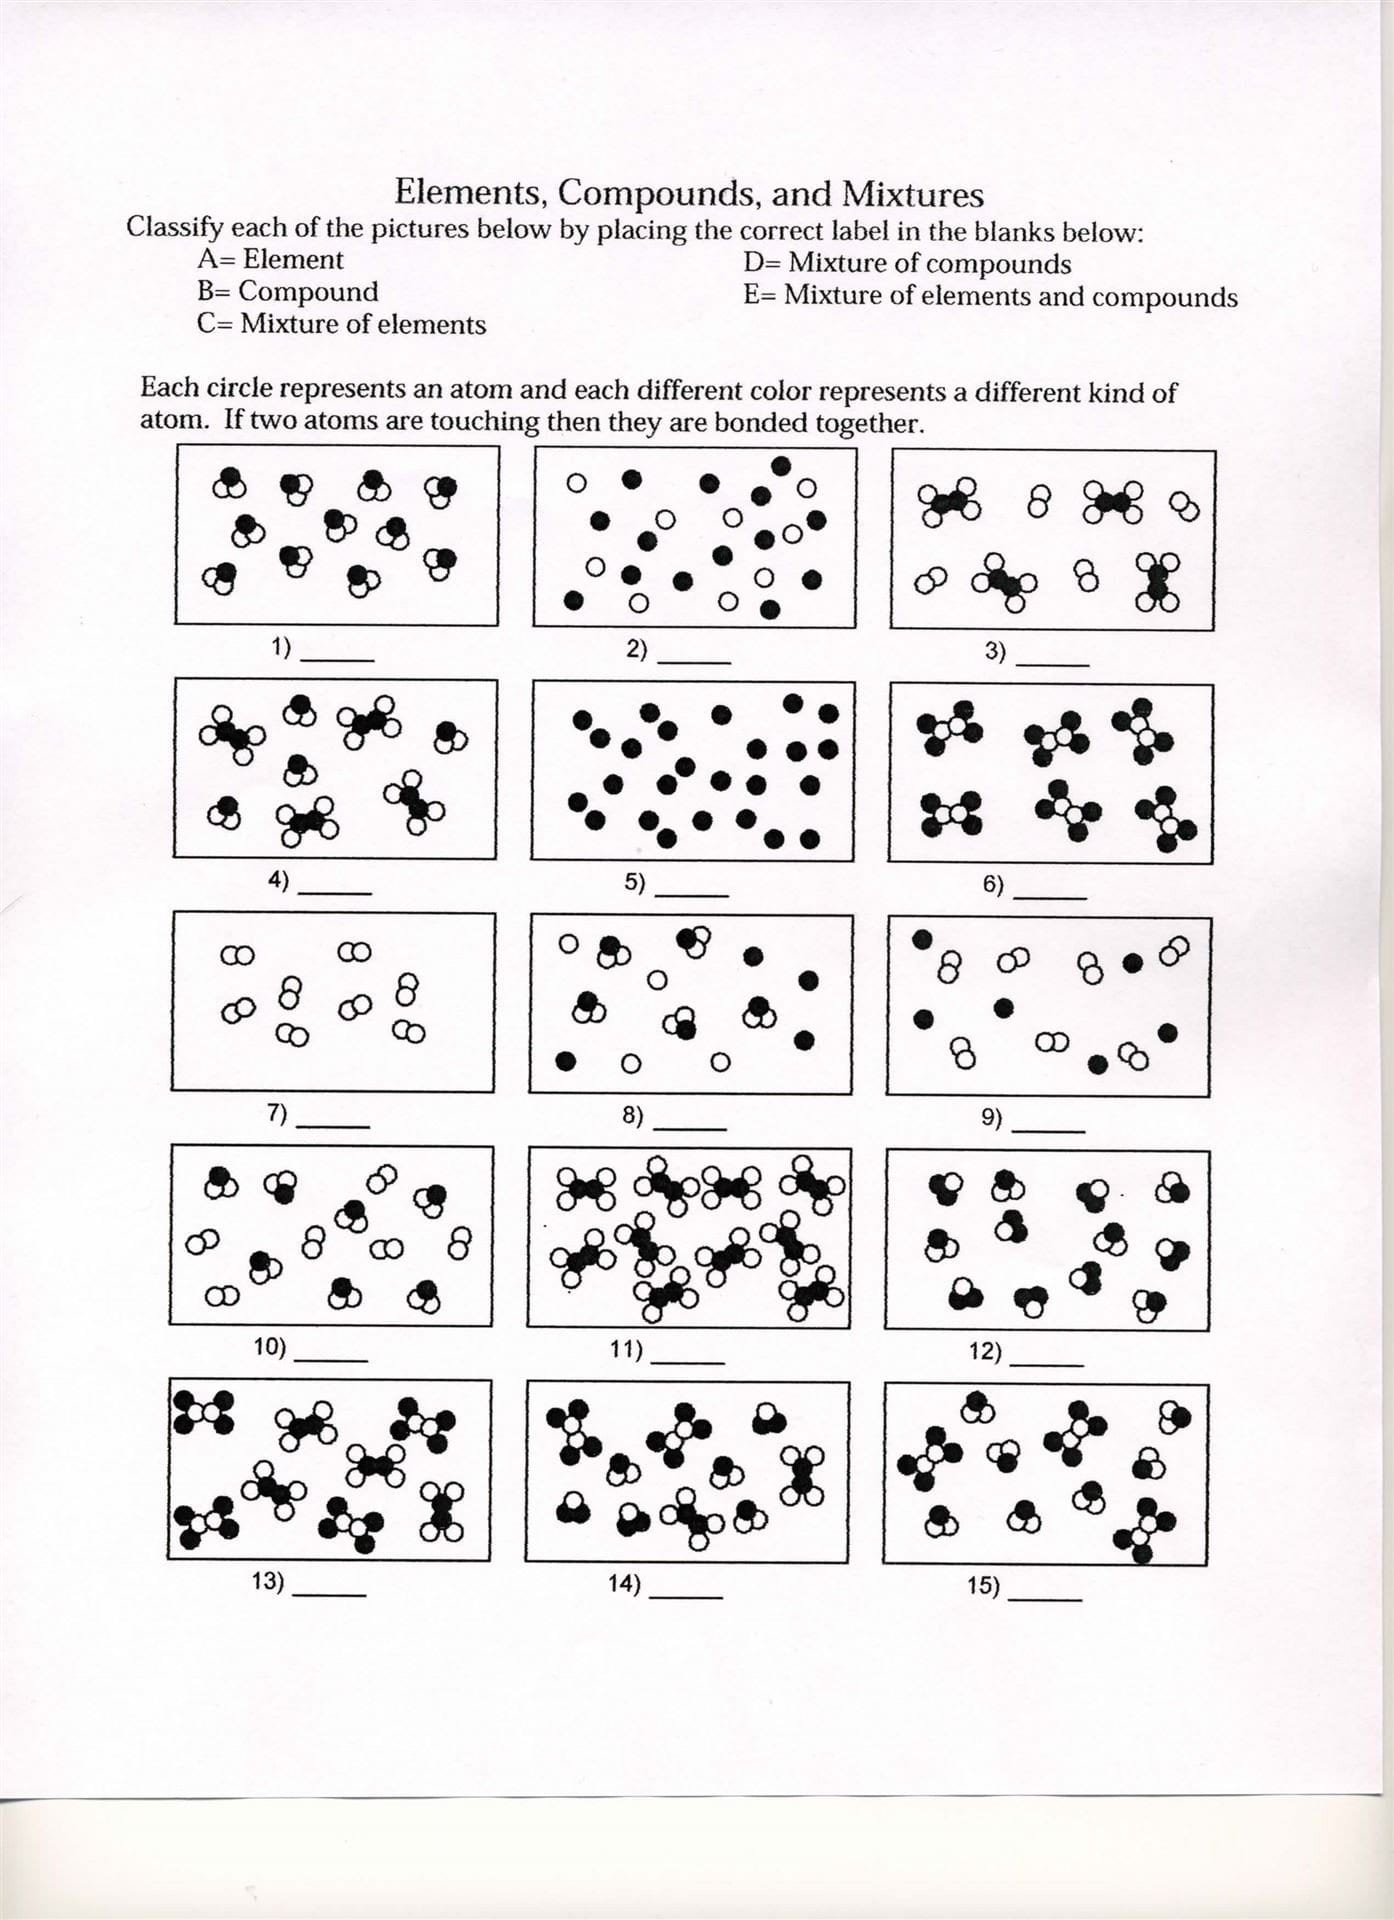 Elements Compounds And Mixtures Worksheet – Wiring Diagram Pertaining To Elements Compounds And Mixtures 1 Worksheet Answers